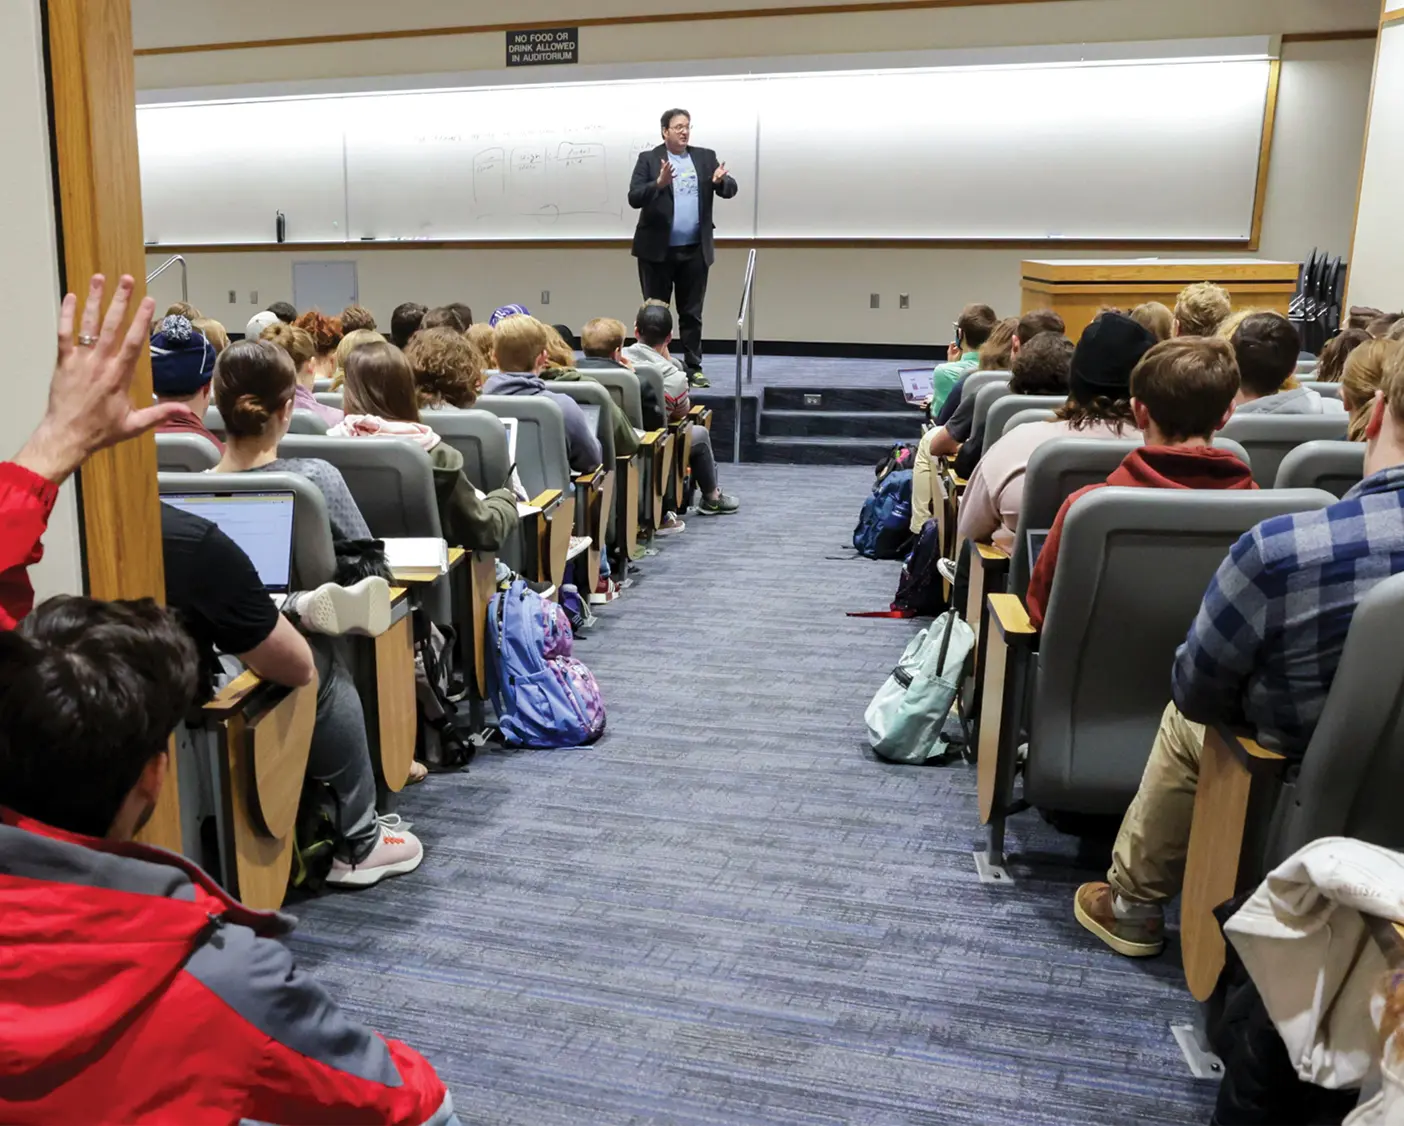 Brandon Sanderson stands at the front of a packed lecture hall. The hall is so full that some students sit in the entrance and hallway.